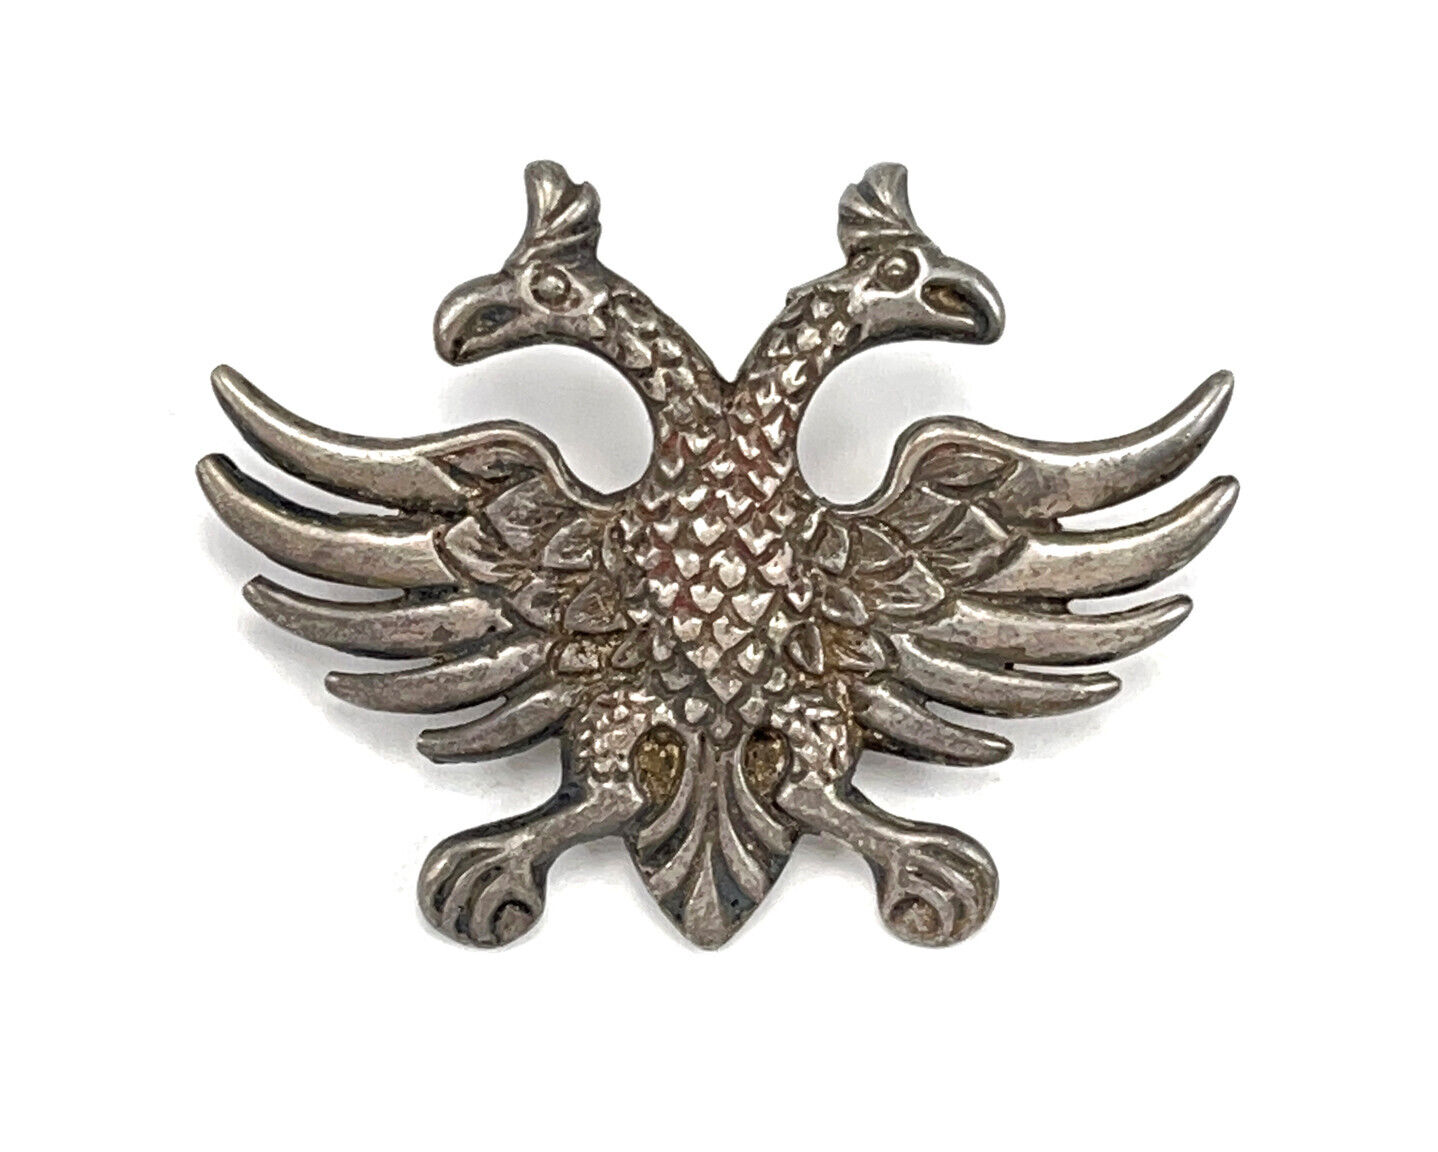 Antique WW1 Era Russian Imperial Double Headed Eagle Brooch Pin Solid 800 Silver